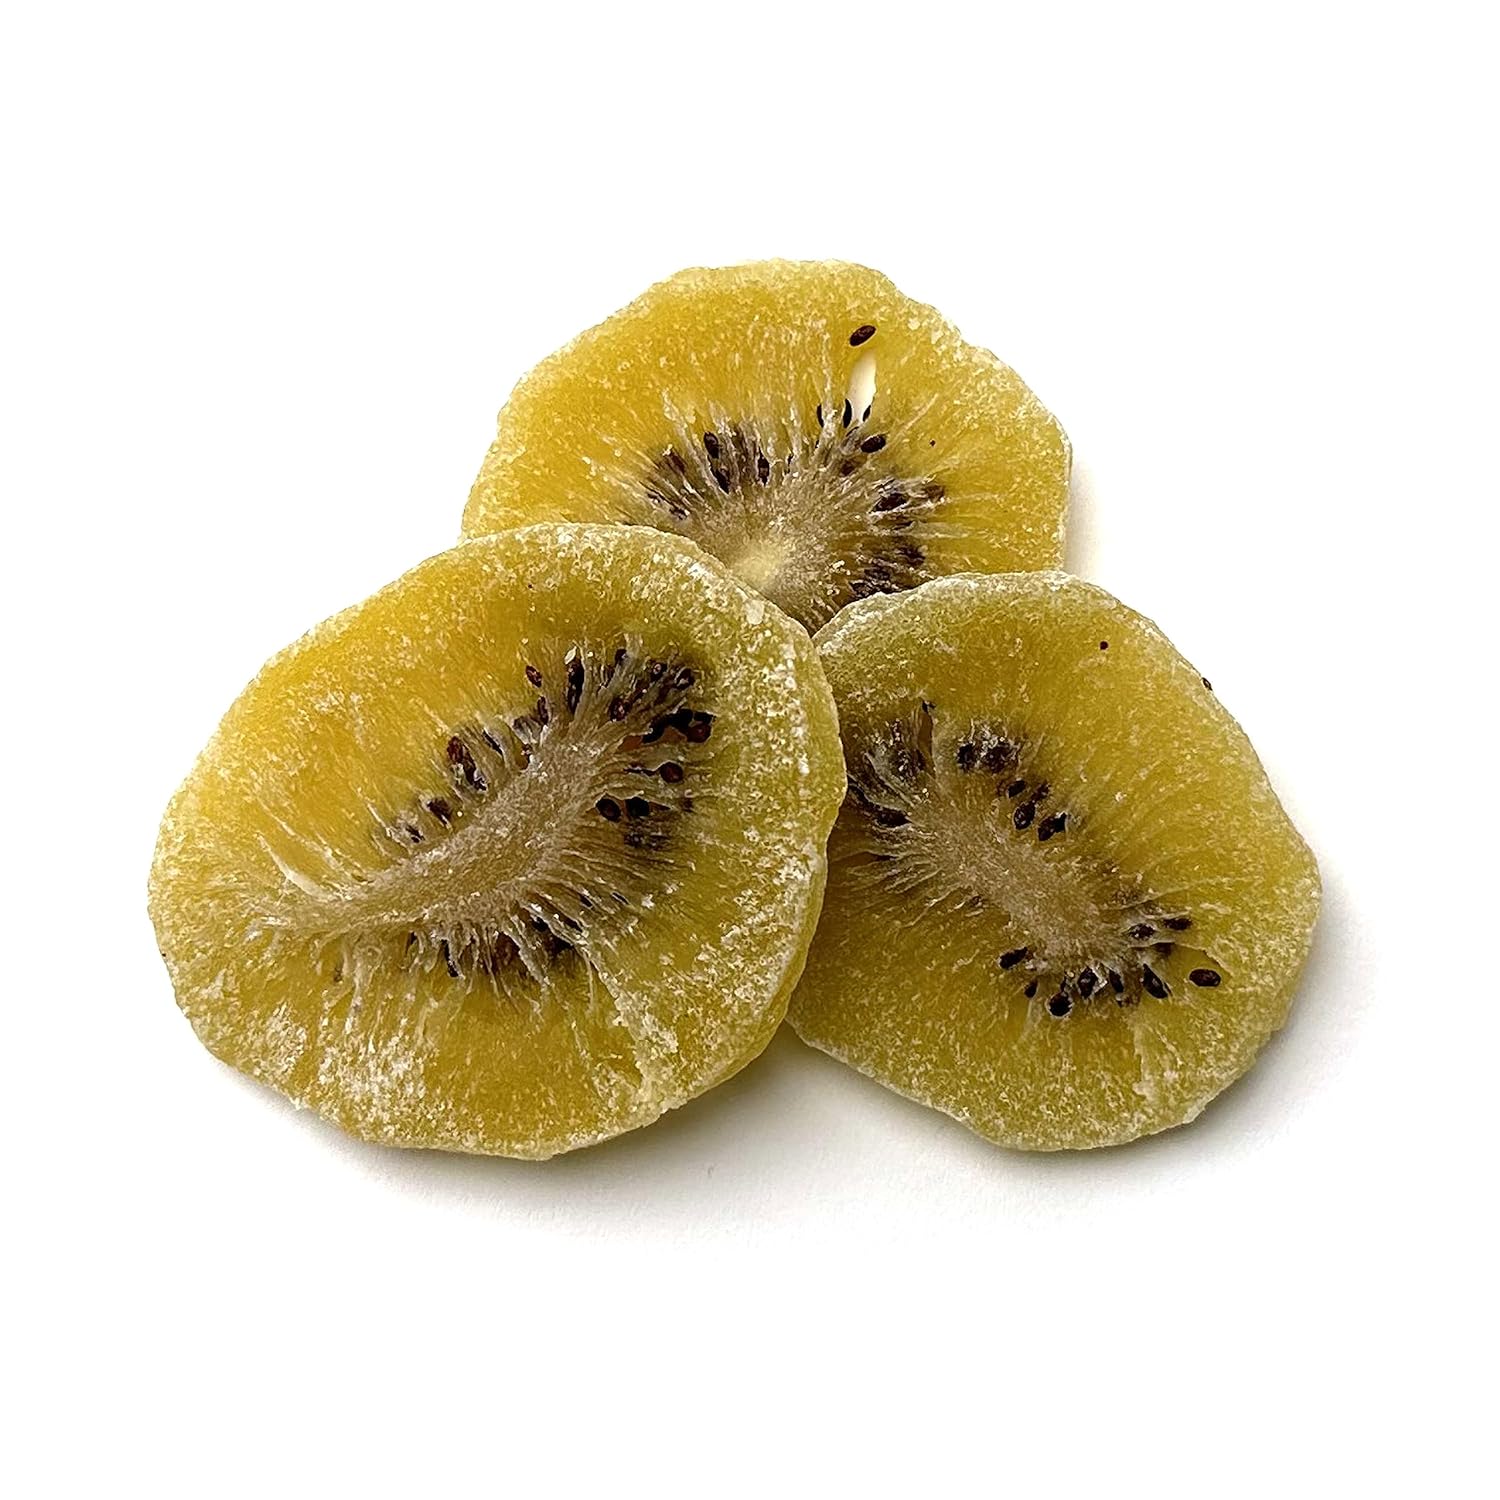 Yupik Dried Infused Fancy Kiwi Slices, 2.2 lb, Dried Fruit, Snack On the Go, Chewy & Sweet